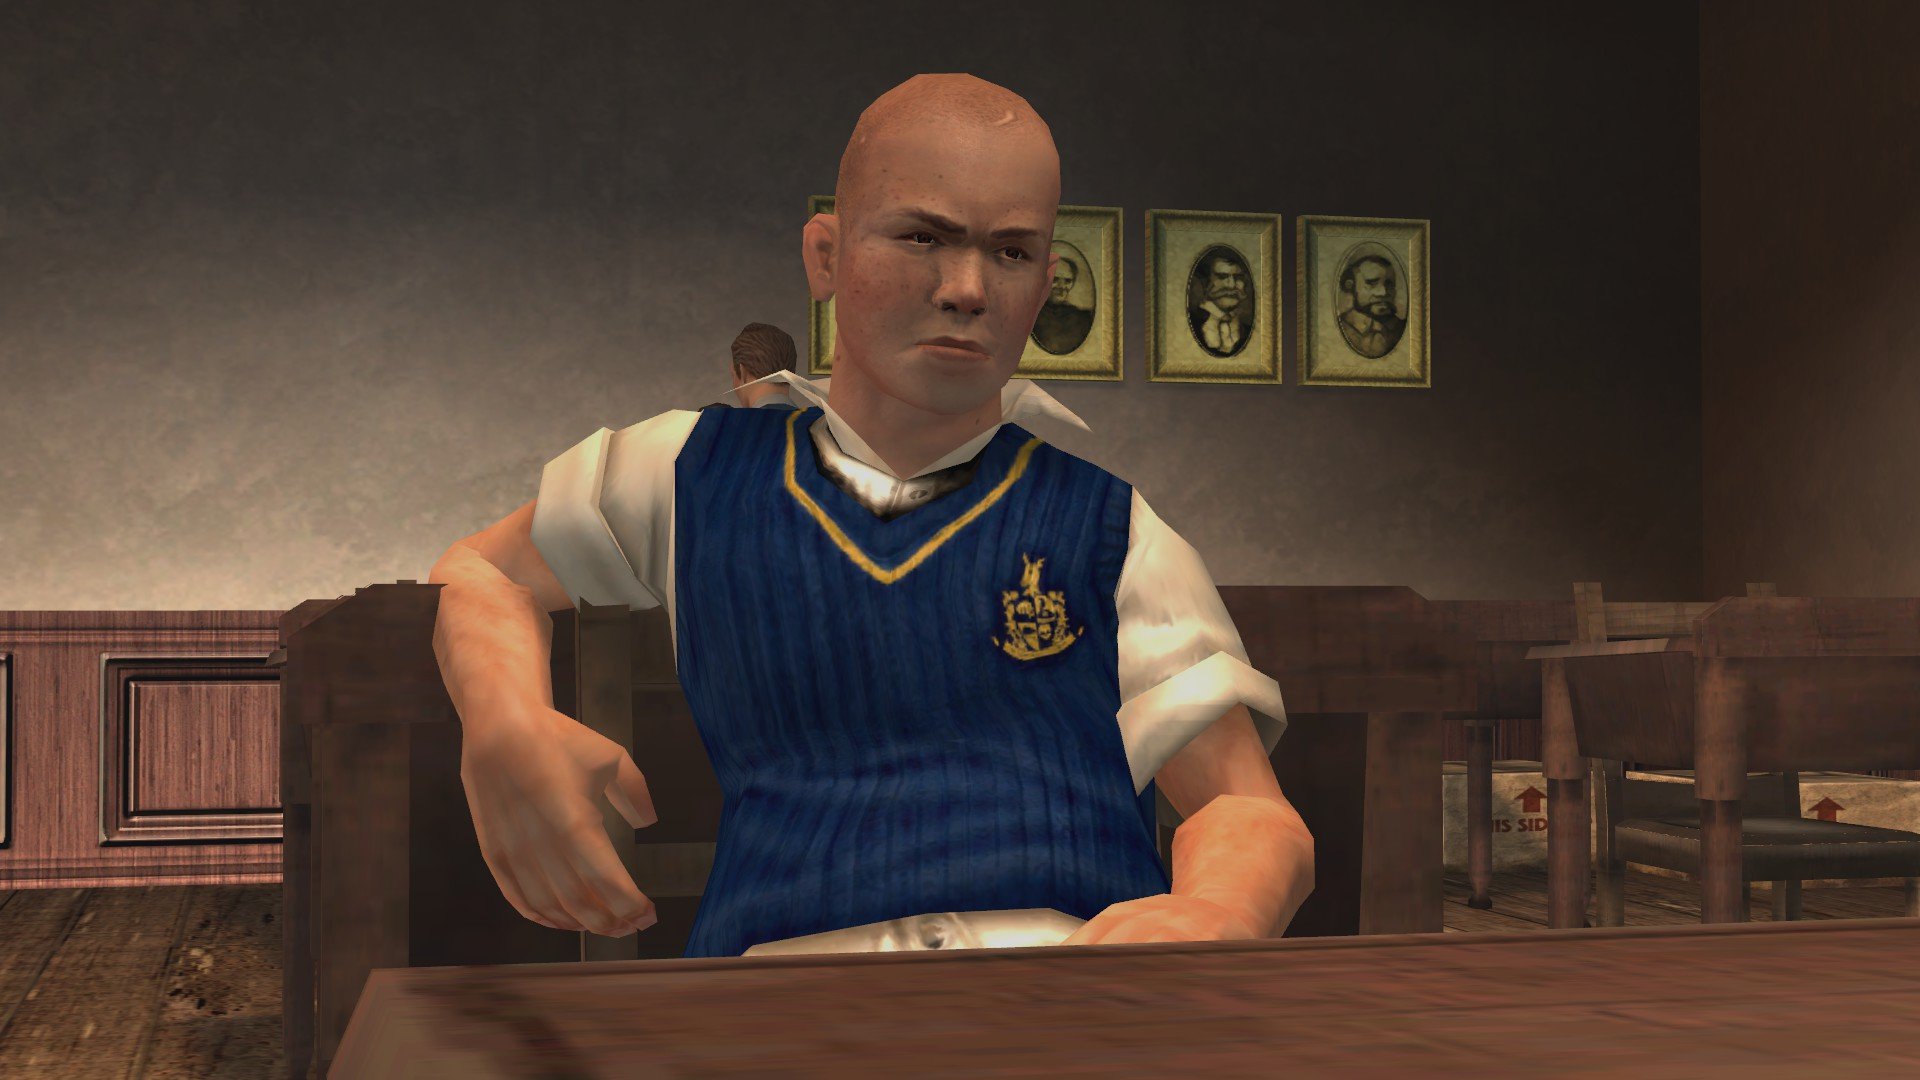 Bully: Anniversary Edition Launches Today for Mobile - Niche Gamer